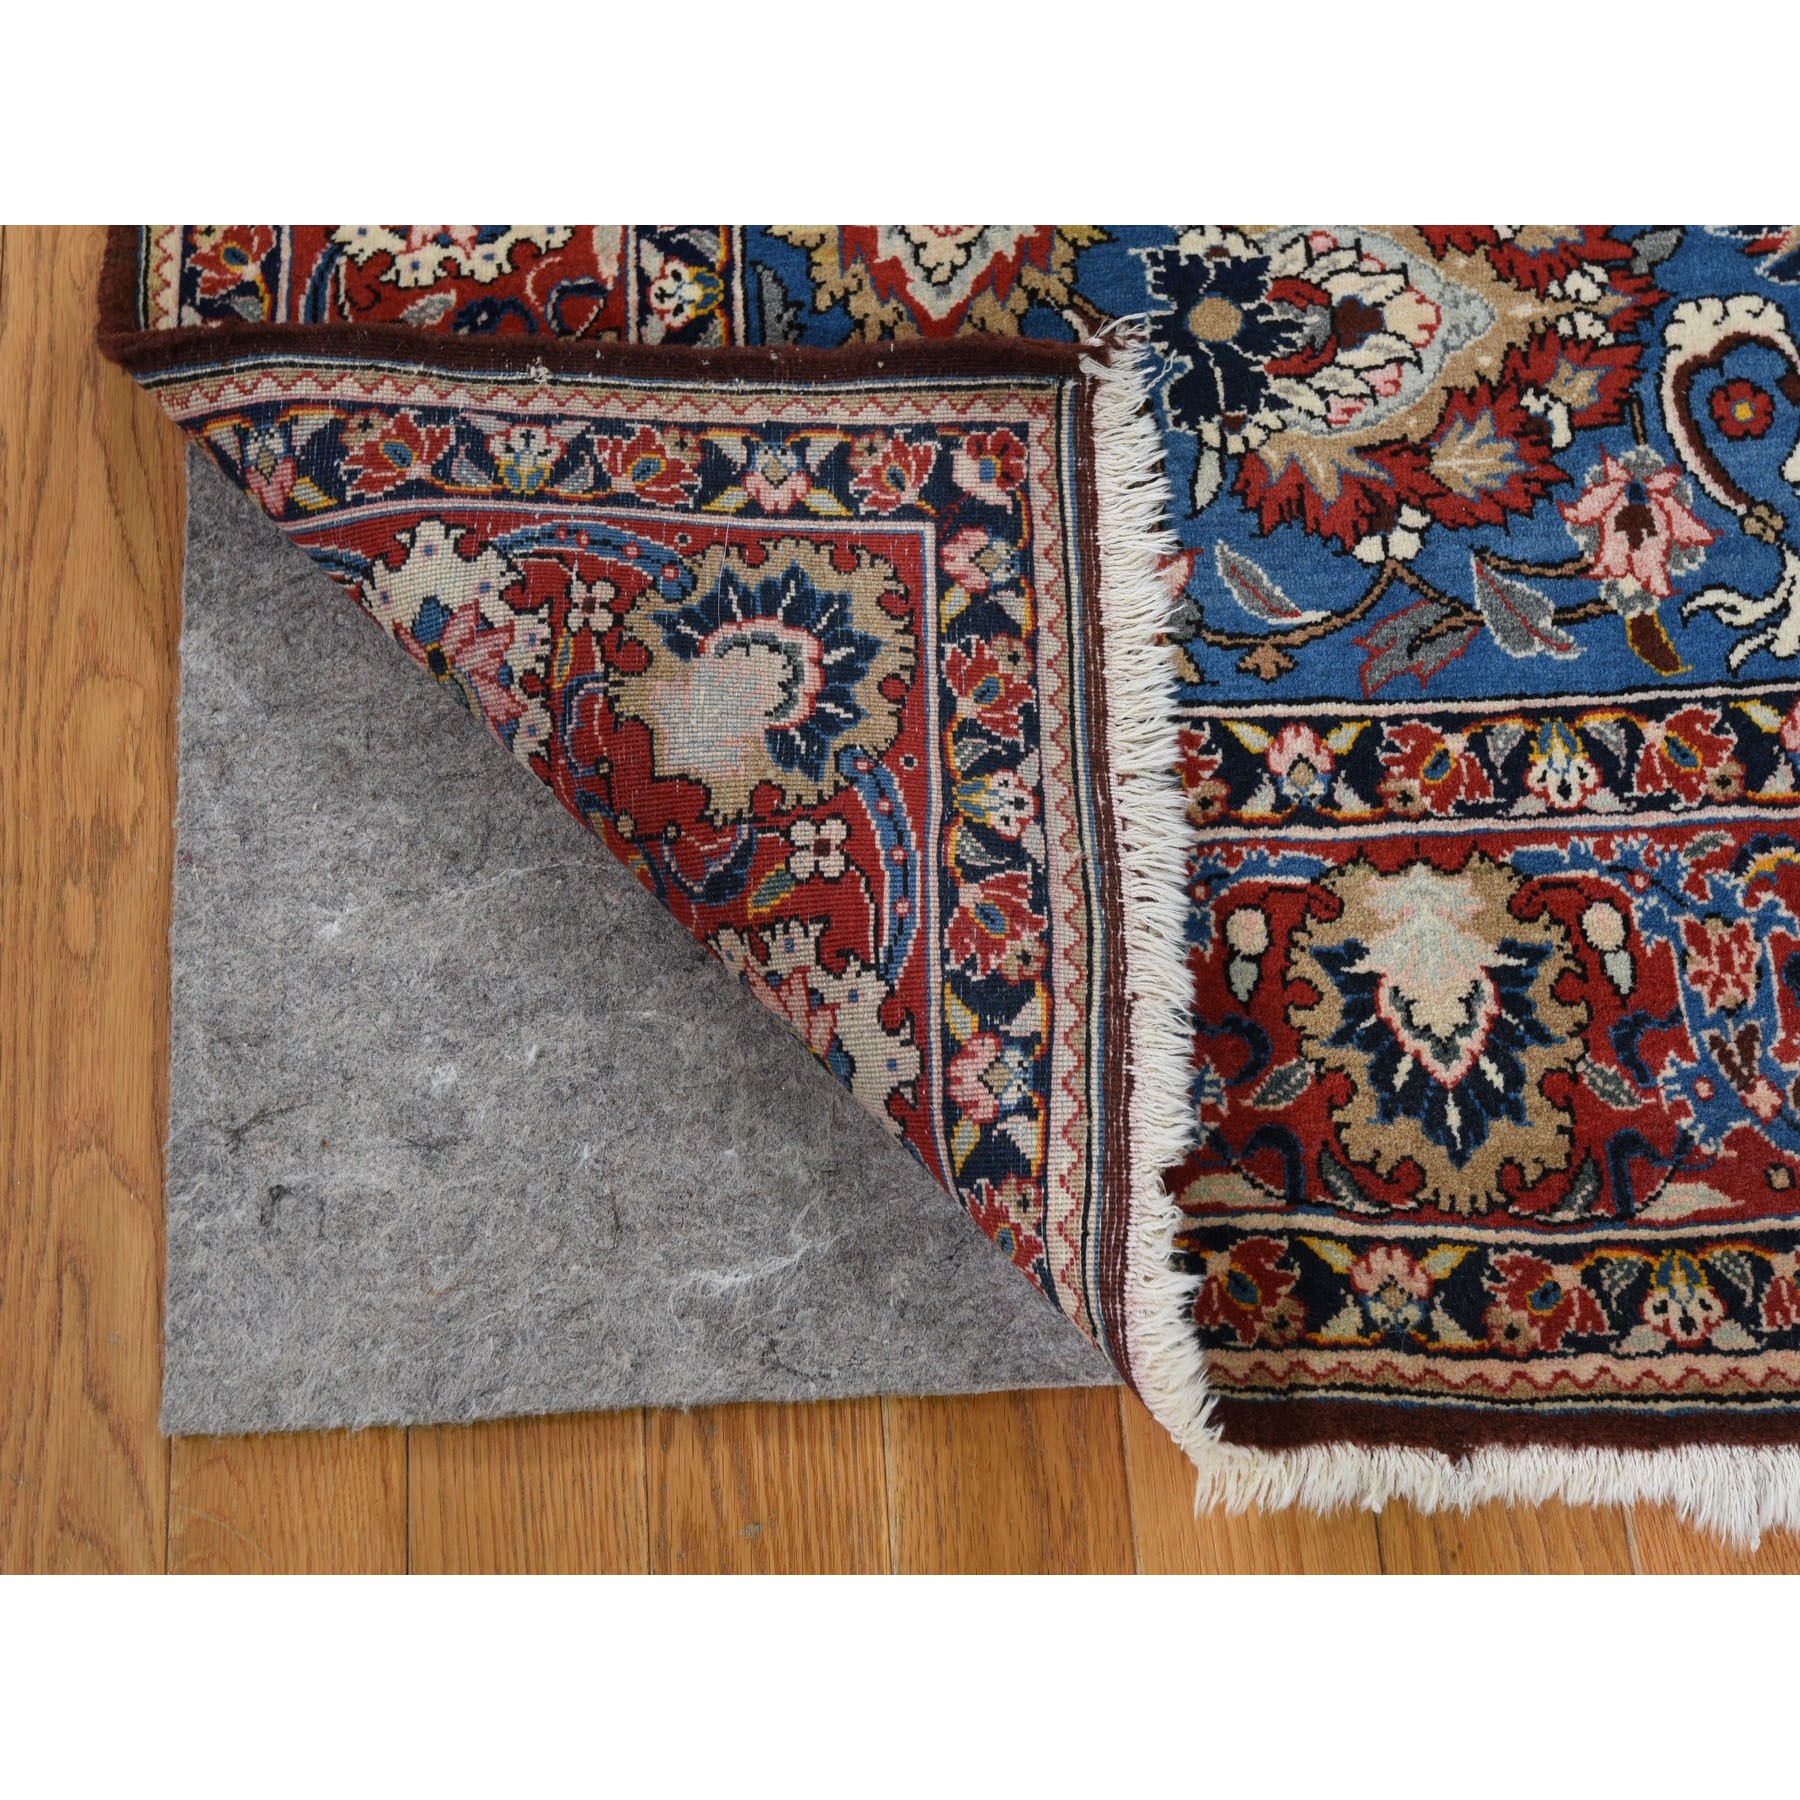 4'8"x7' Blue Vintage Persian Qum Full Pile Exc Condition Hand Woven Oriental Rug 